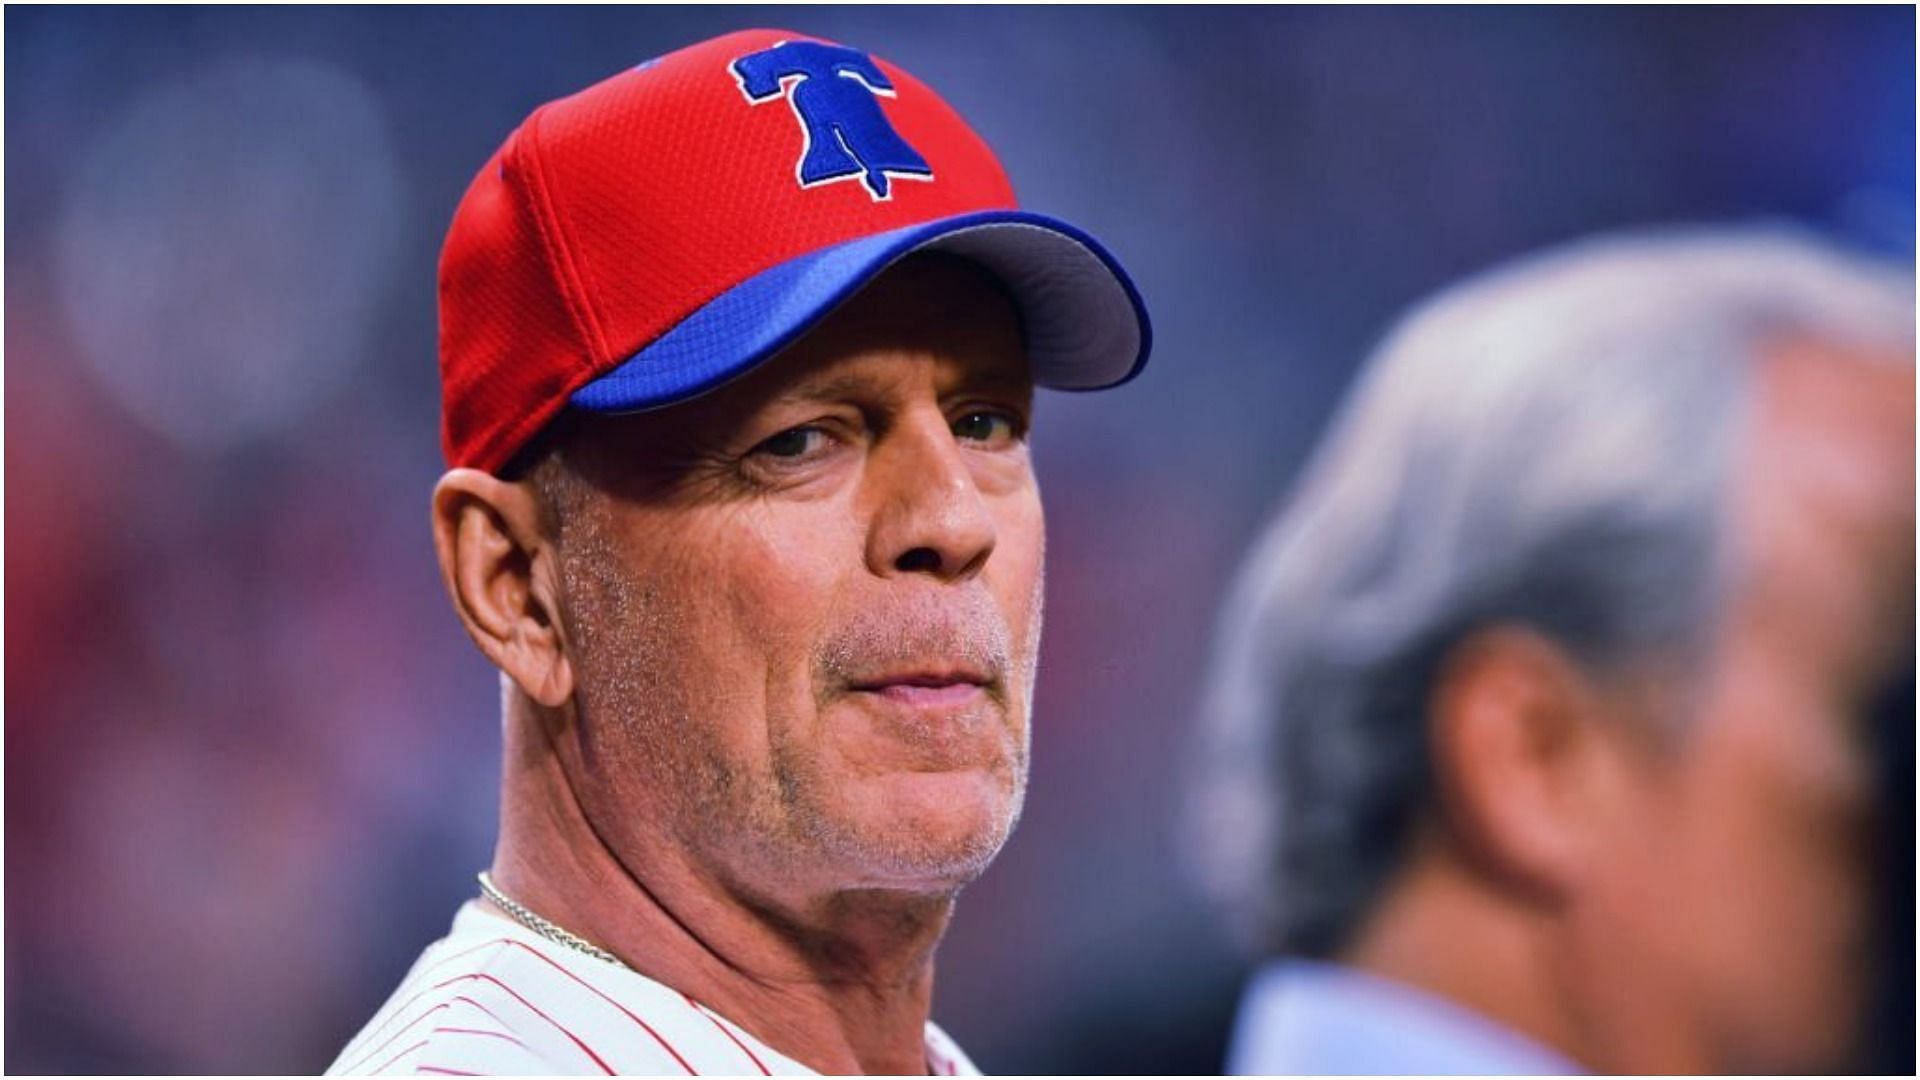 Bruce Willis looks on before throwing out the first pitch before the game between the Milwaukee Brewers and Philadelphia Phillies (Image via Kyle Ross/Getty Images)